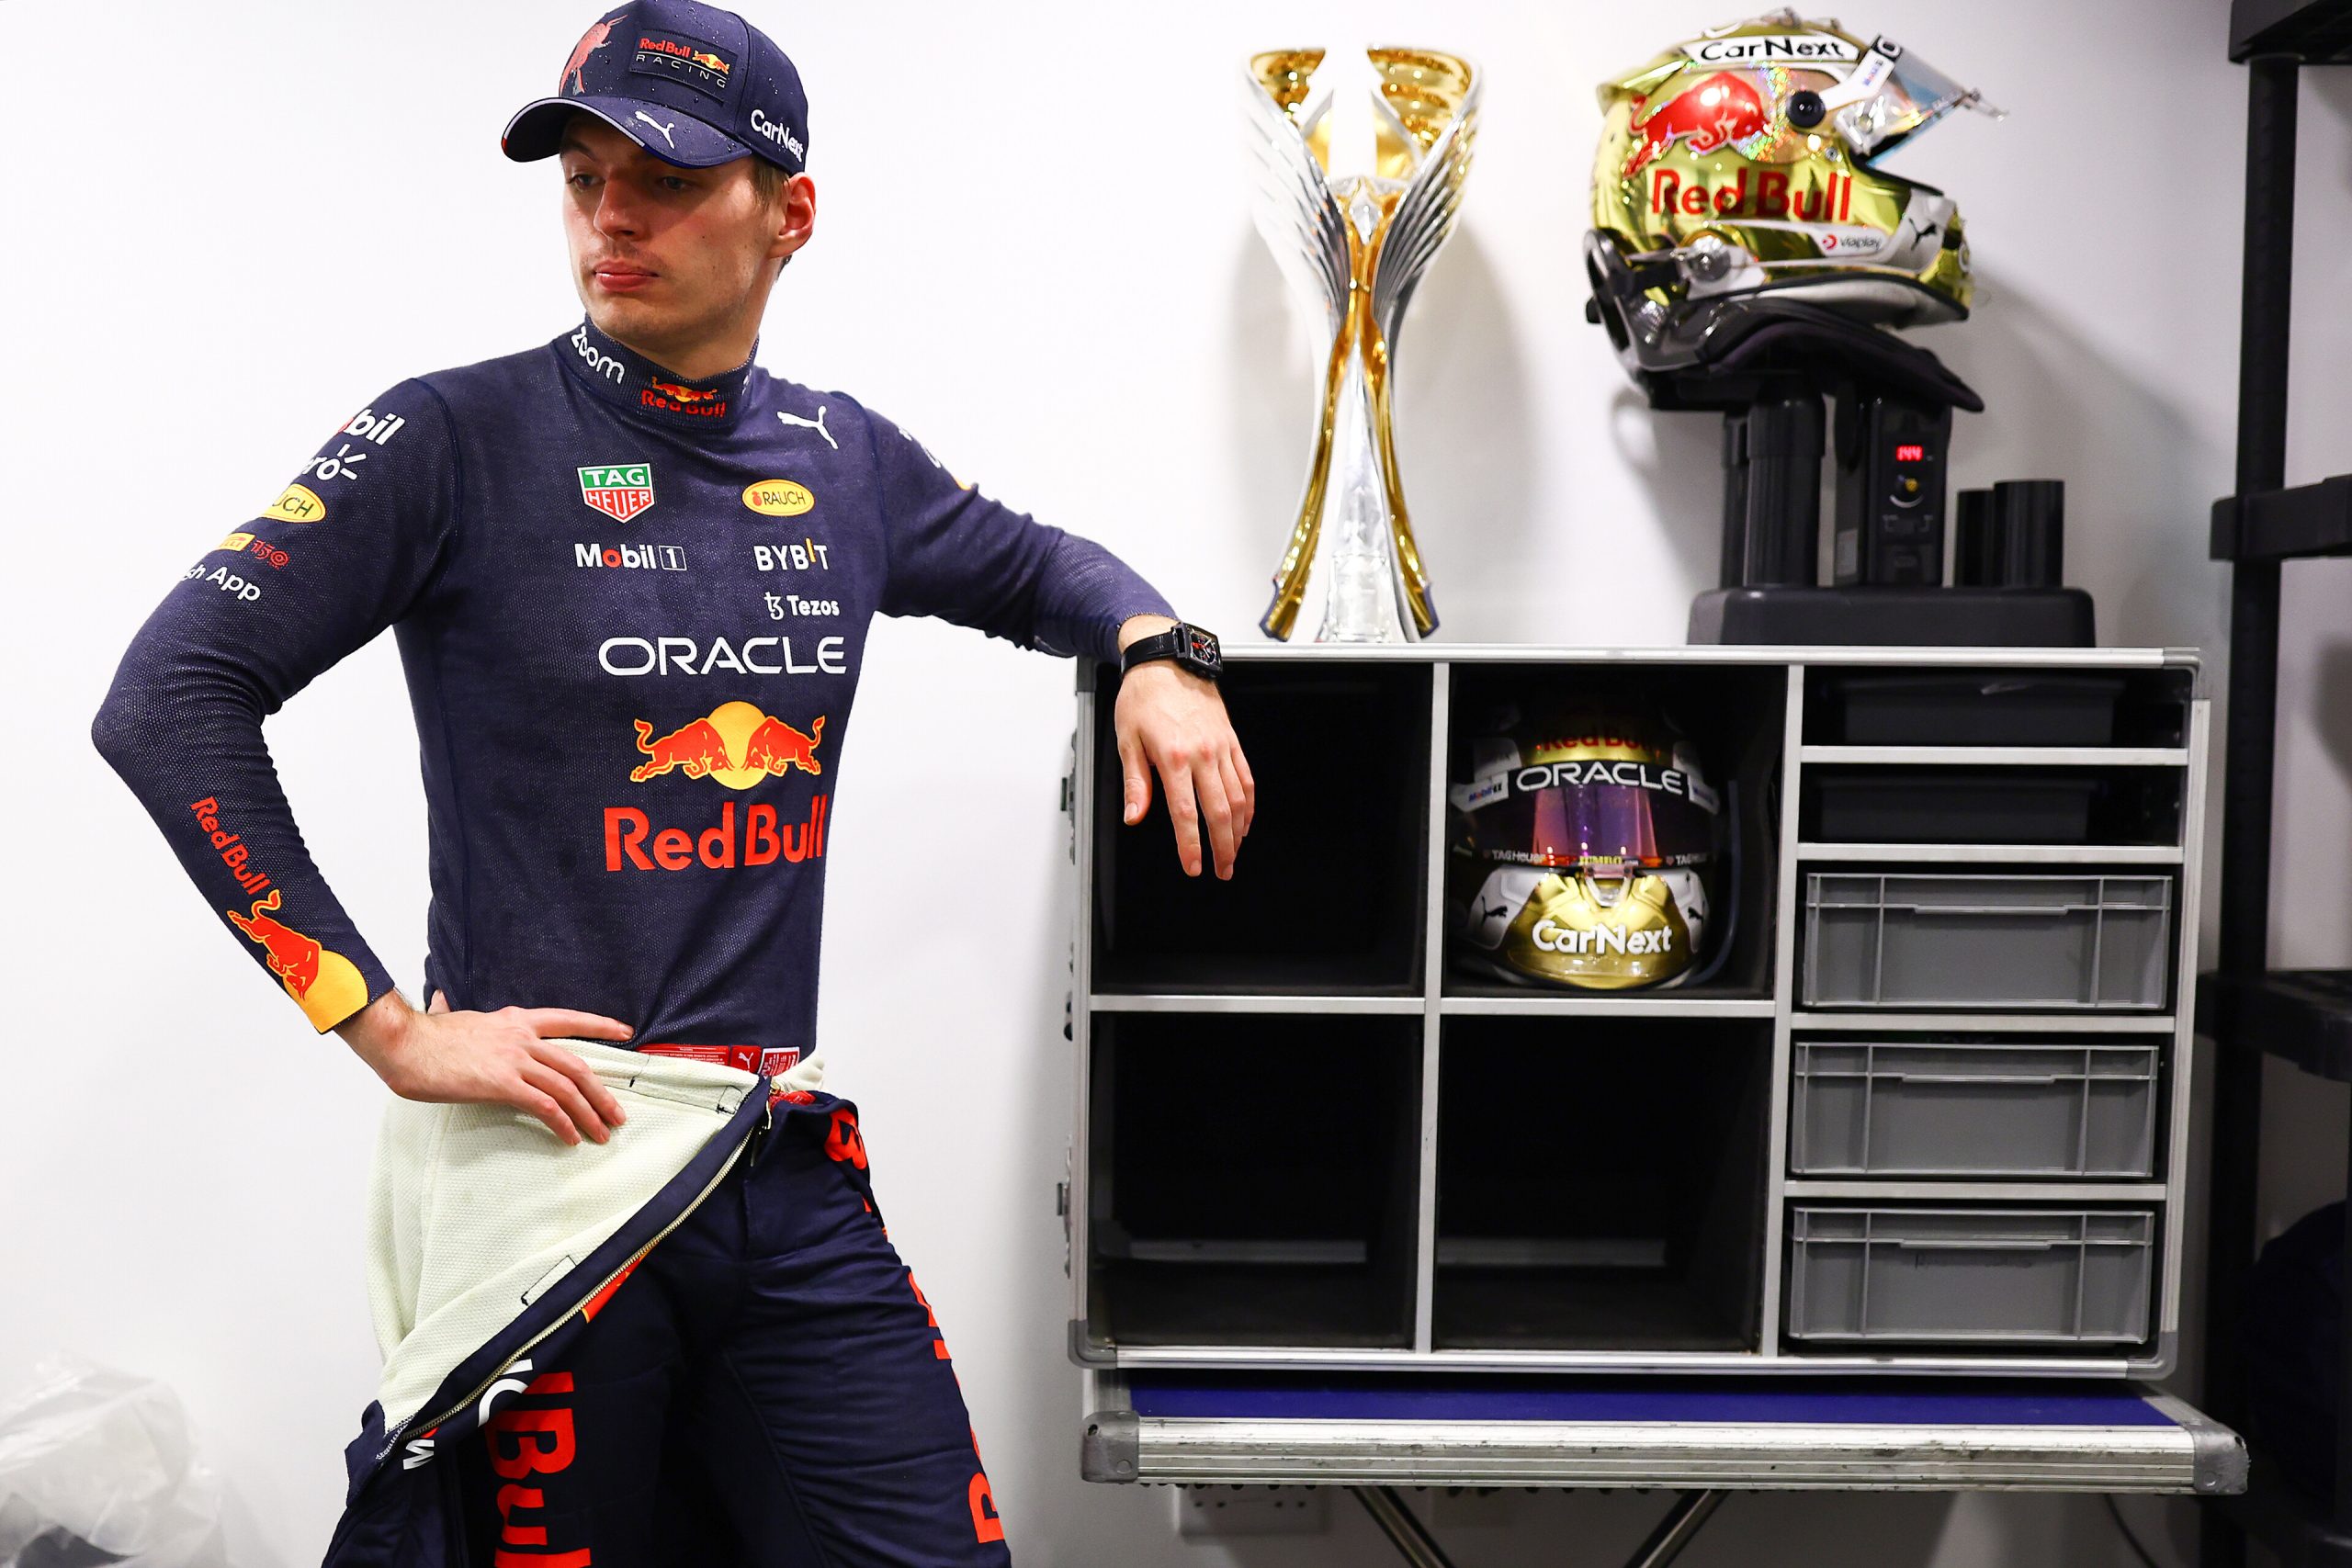 F1 Predictions - ABU DHABI, UNITED ARAB EMIRATES - NOVEMBER 20: Race winner Max Verstappen of the Netherlands and Oracle Red Bull Racing poses in his room following the F1 Grand Prix of Abu Dhabi at Yas Marina Circuit on November 20, 2022 in Abu Dhabi, United Arab Emirates. (Photo by Mark Thompson/Getty Images) // Getty Images / Red Bull Content Pool // SI202211202924 // Usage for editorial use only //